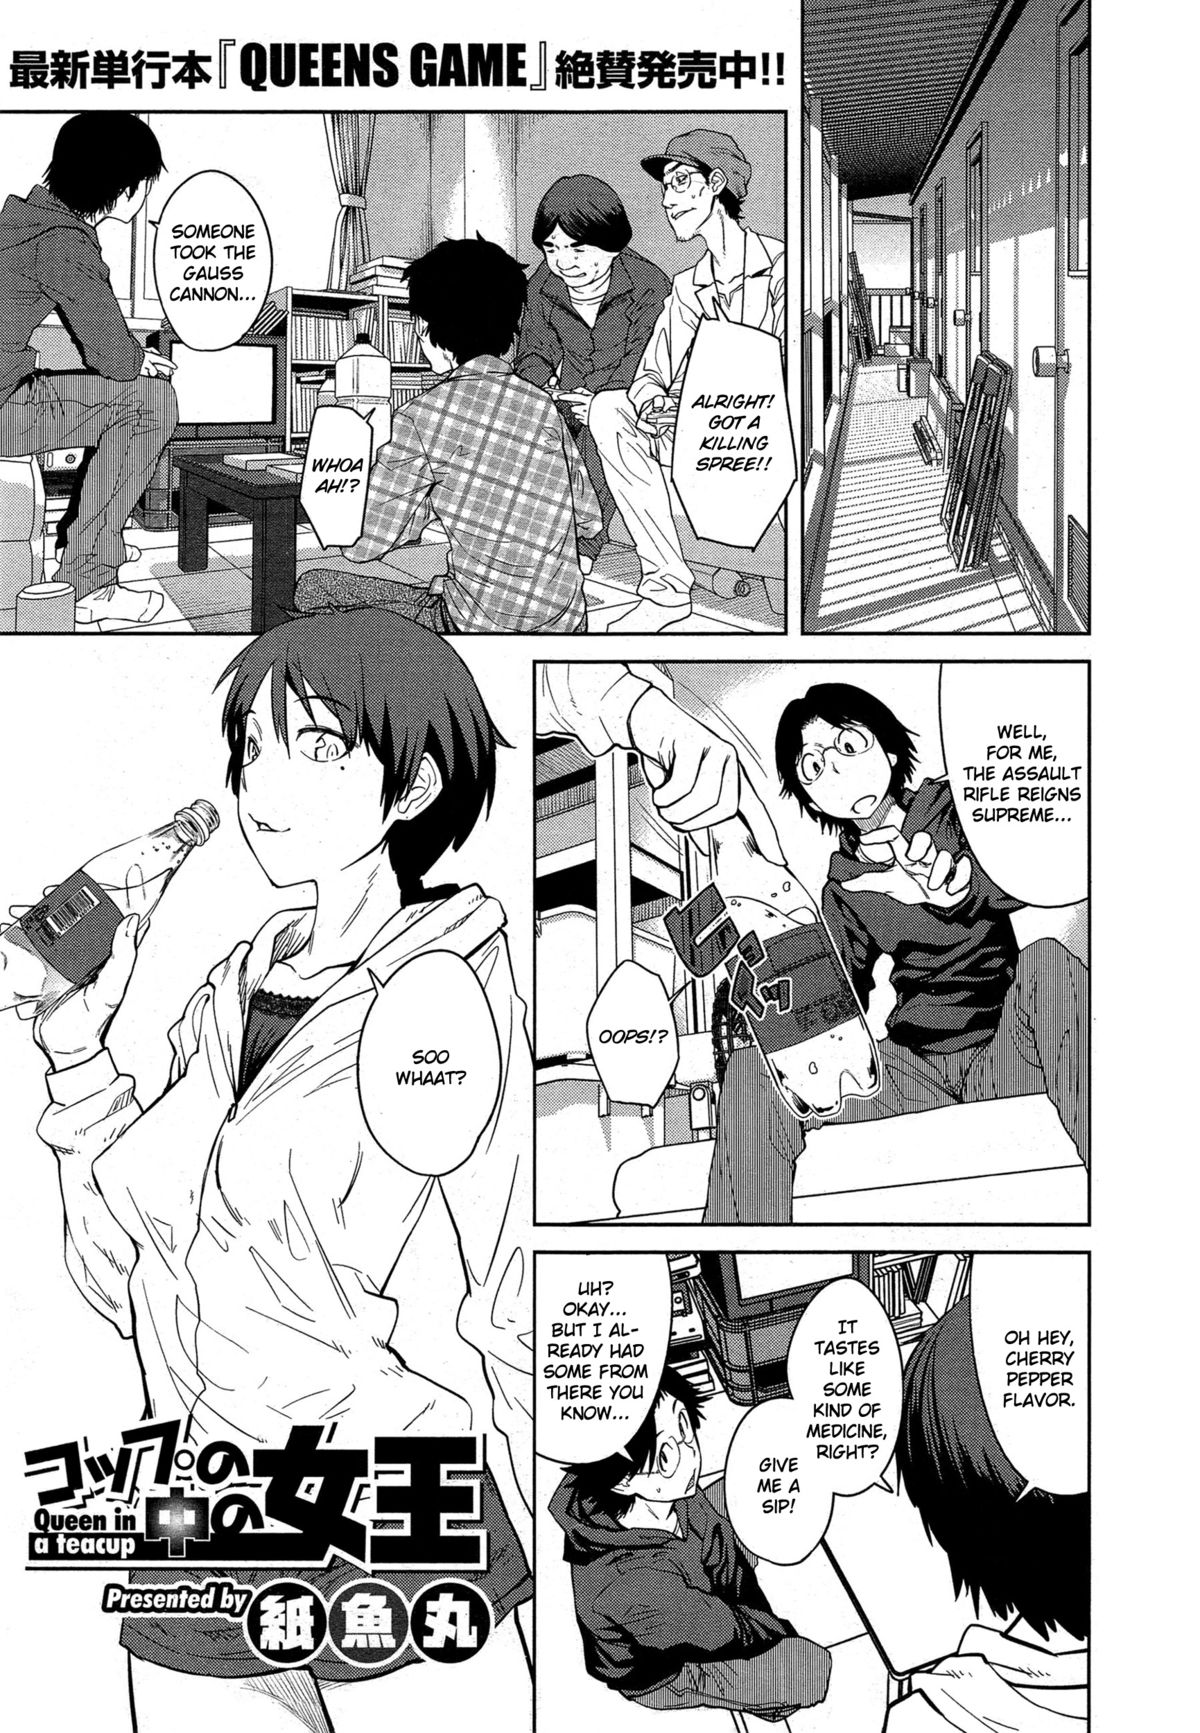 [Shimimaru] Joou Series | Queen Series Ch. 1-4 [English] [Hot Cocoa] page 1 full